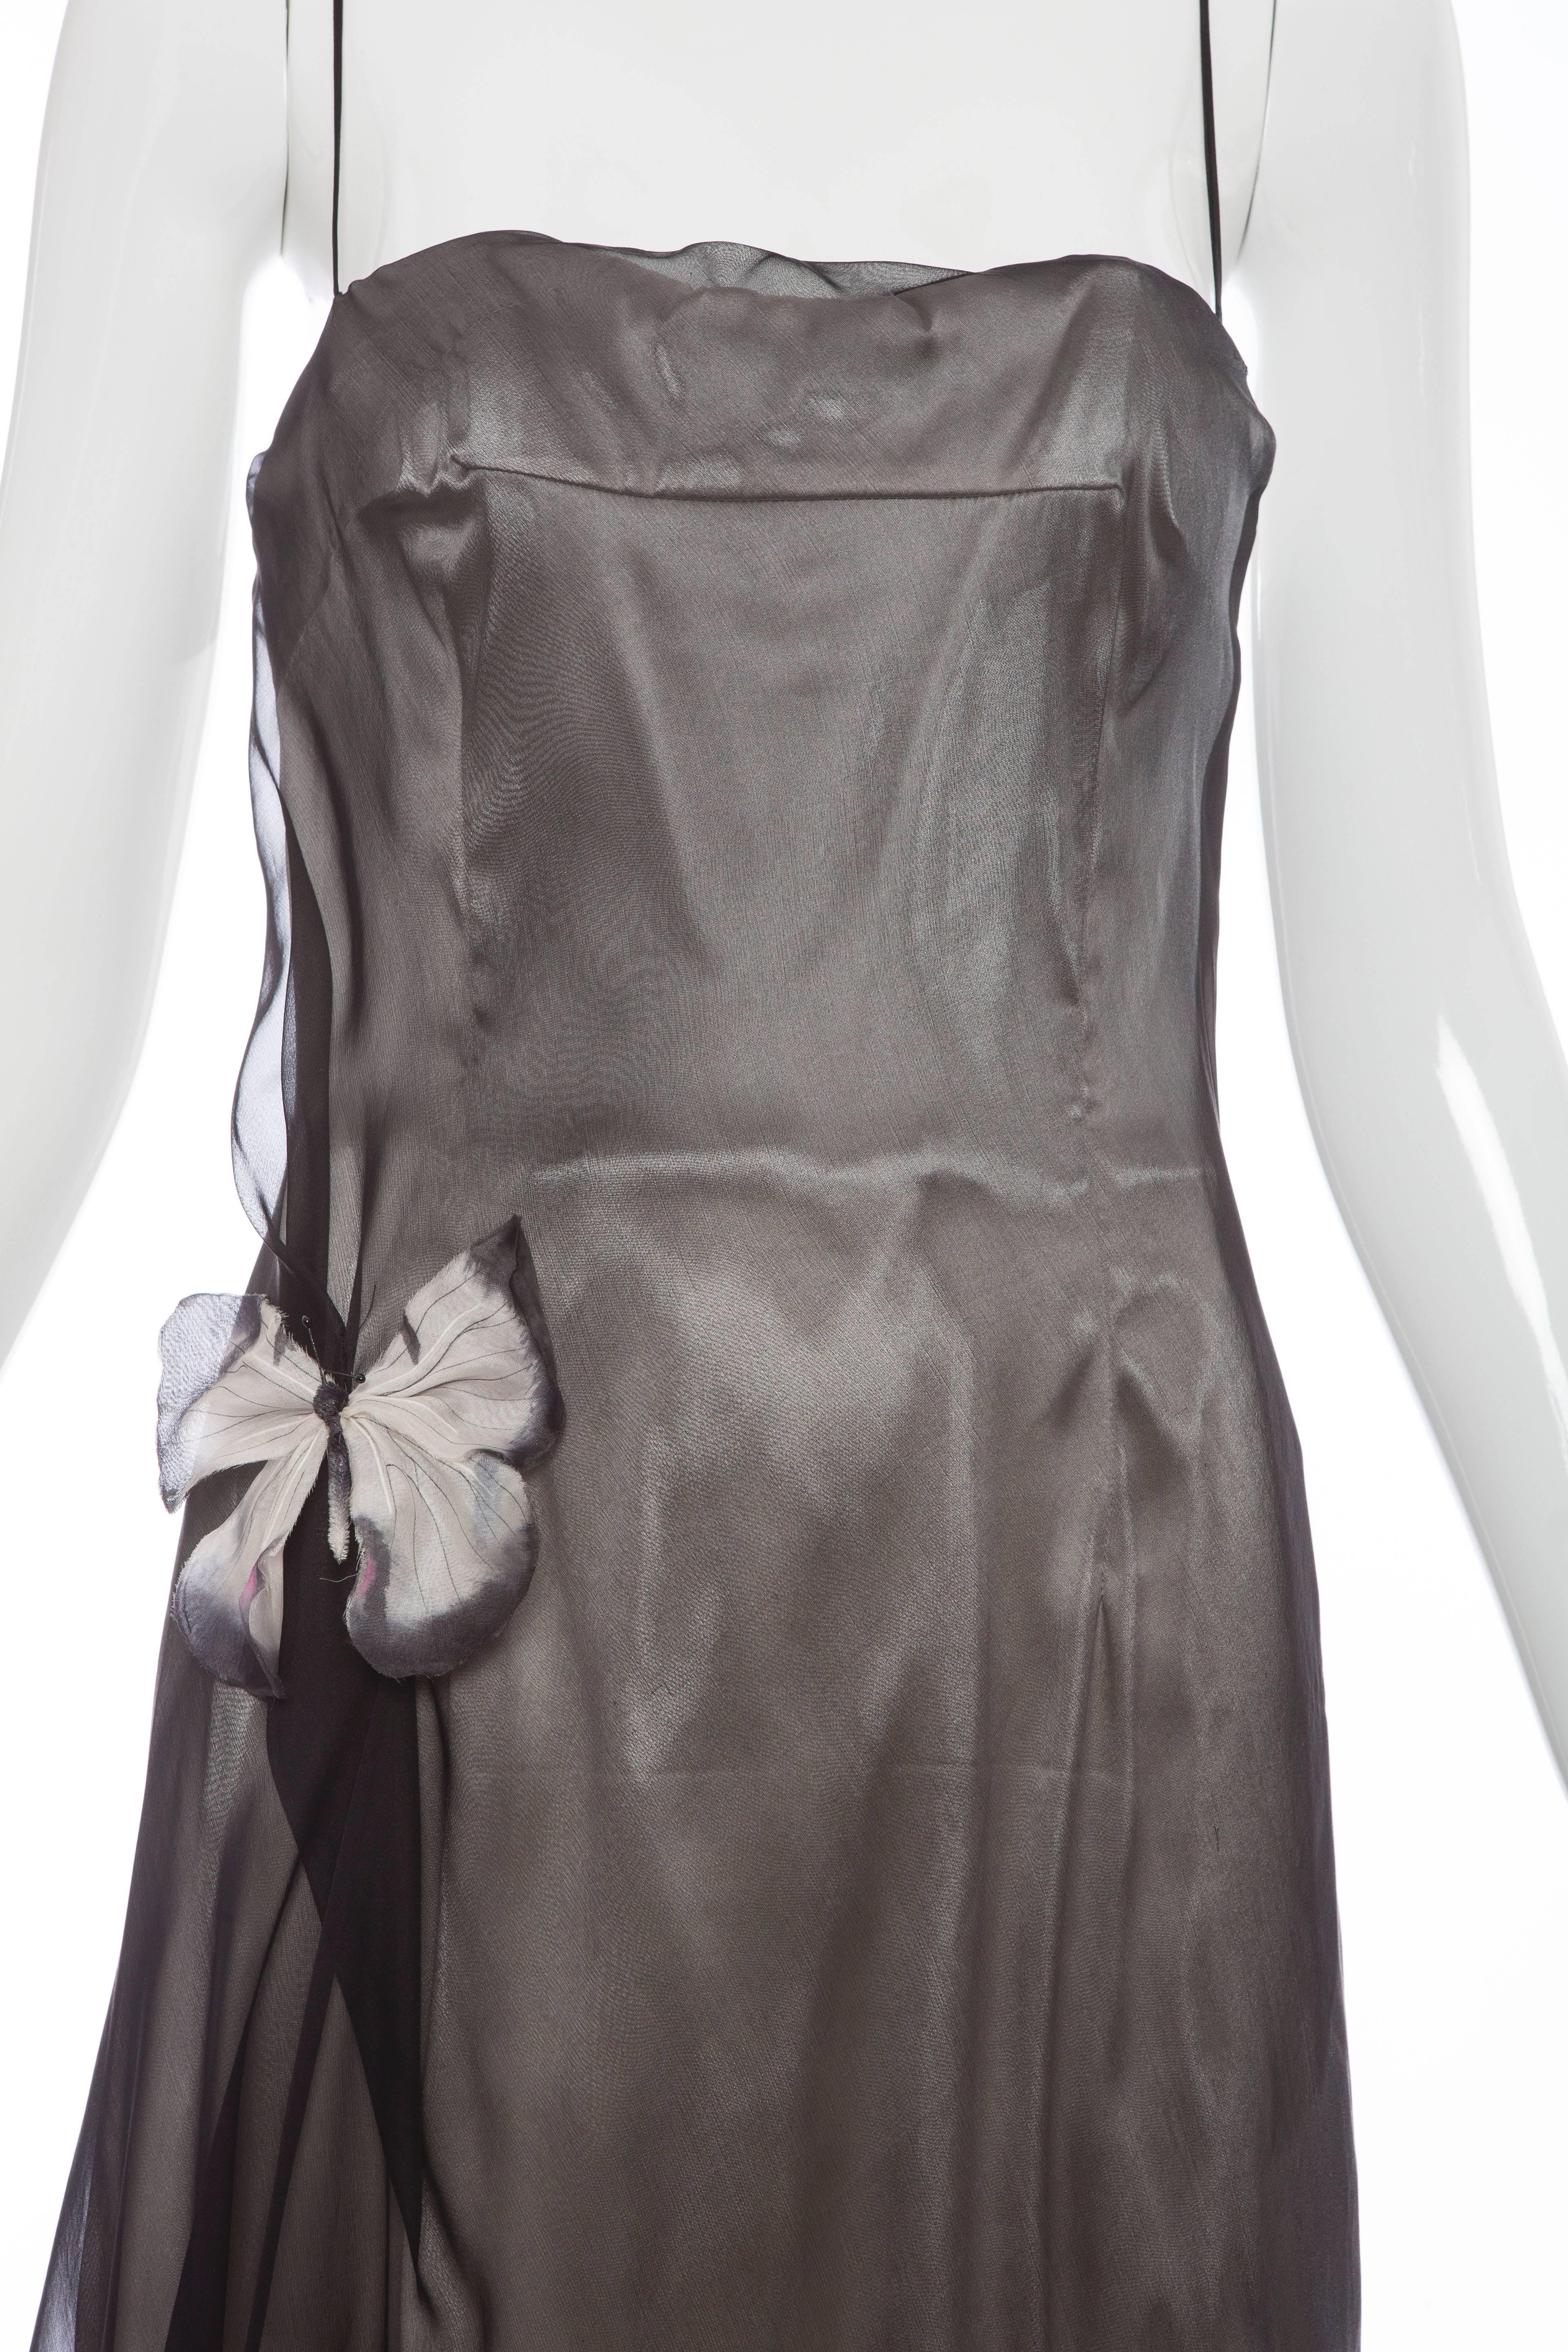 Dolce & Gabbana Runway Silk Chiffon Stromboli Collection Dress, Spring 1998 In Excellent Condition For Sale In Cincinnati, OH